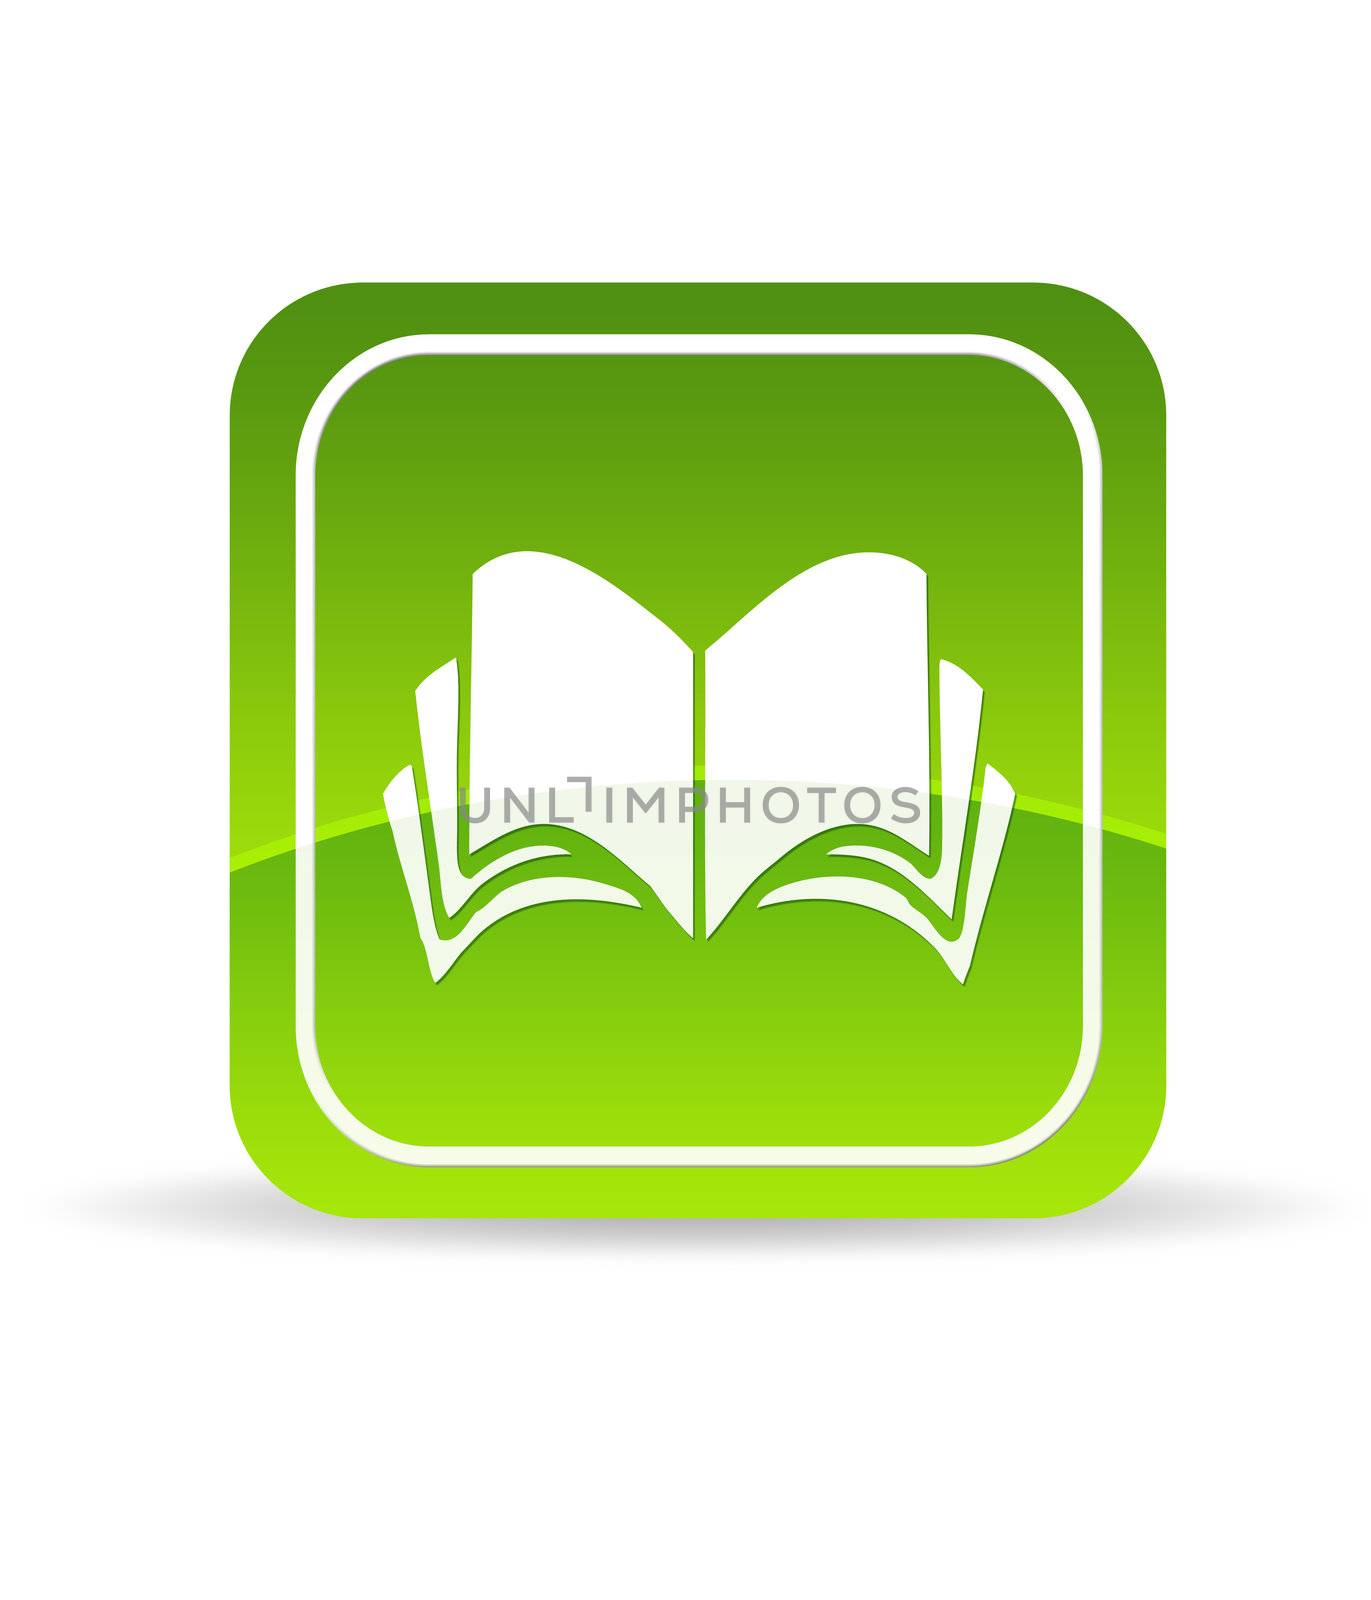 High resolution green book icon on white background.